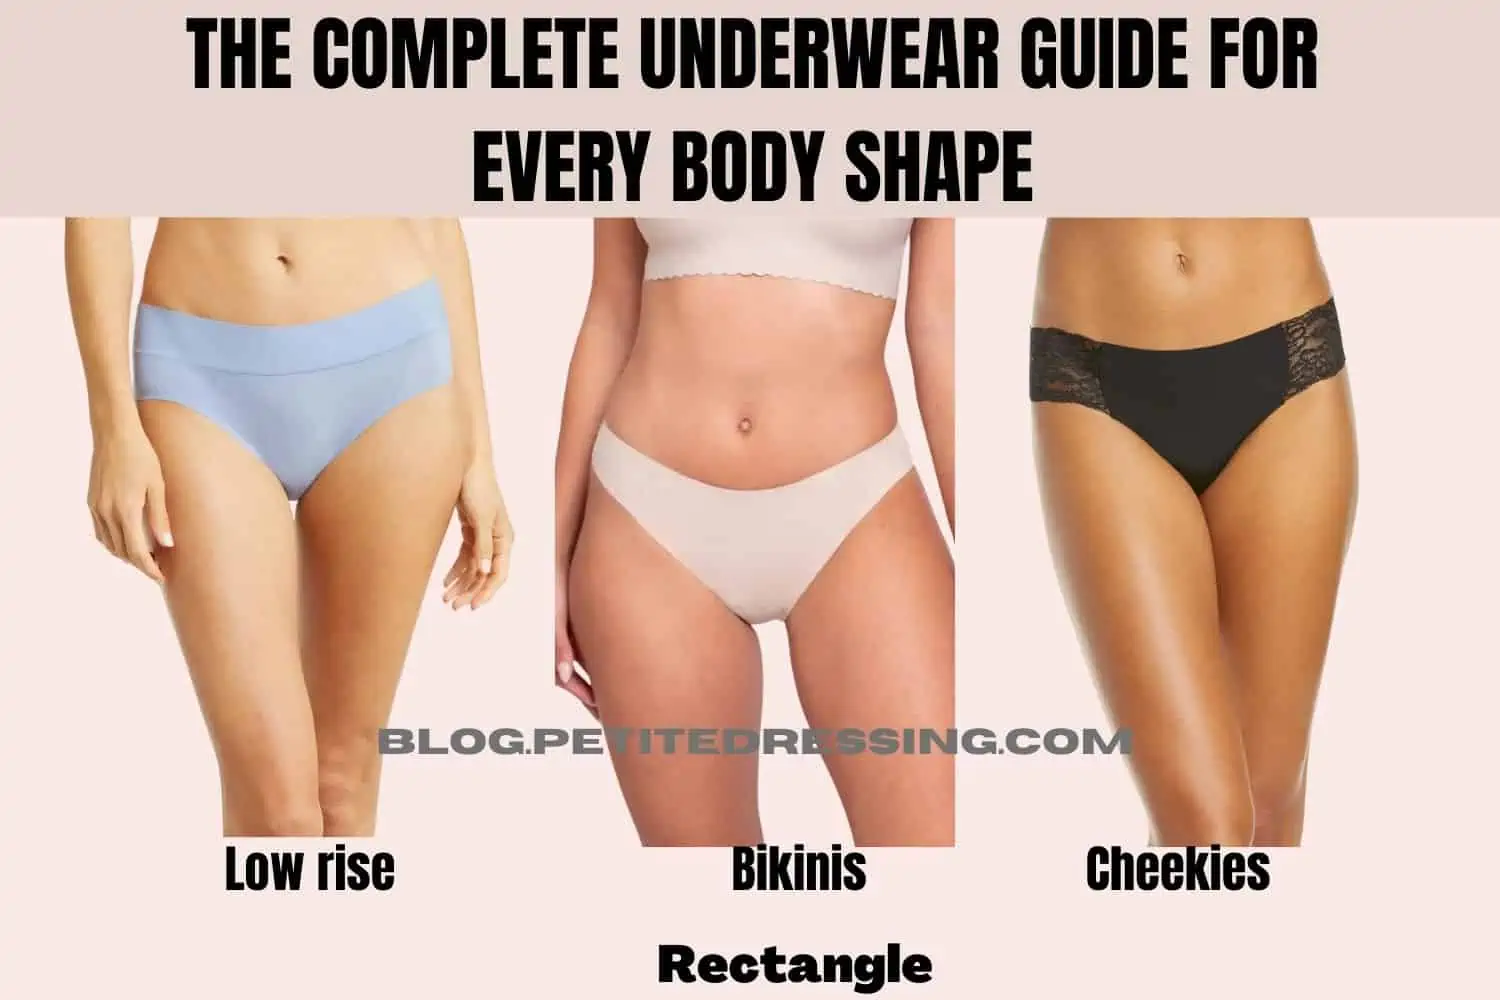 Finding The Perfect Lingerie For Your Body Shape - Common Body